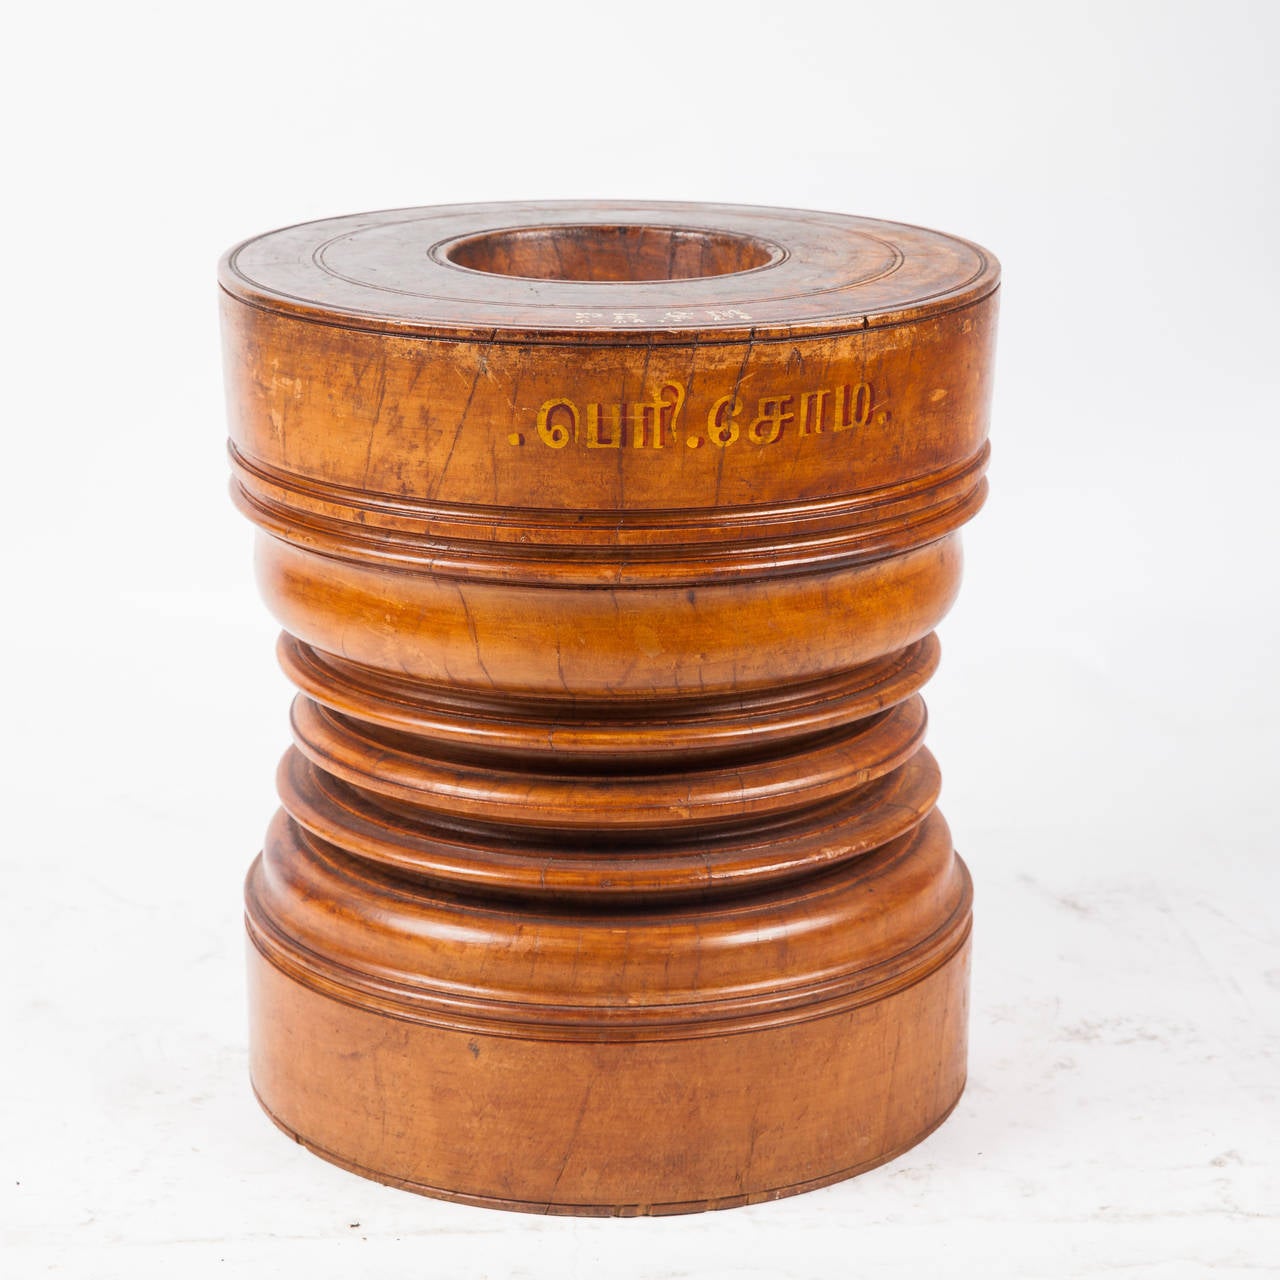 Solid satinwood rice grinder from Southern India. Rice was poured into top concavity and pounded into flour using a heavy wooden pole. Wonderful paint details. Excellent patina. Makes great low side table and decorative object. We do have ones that